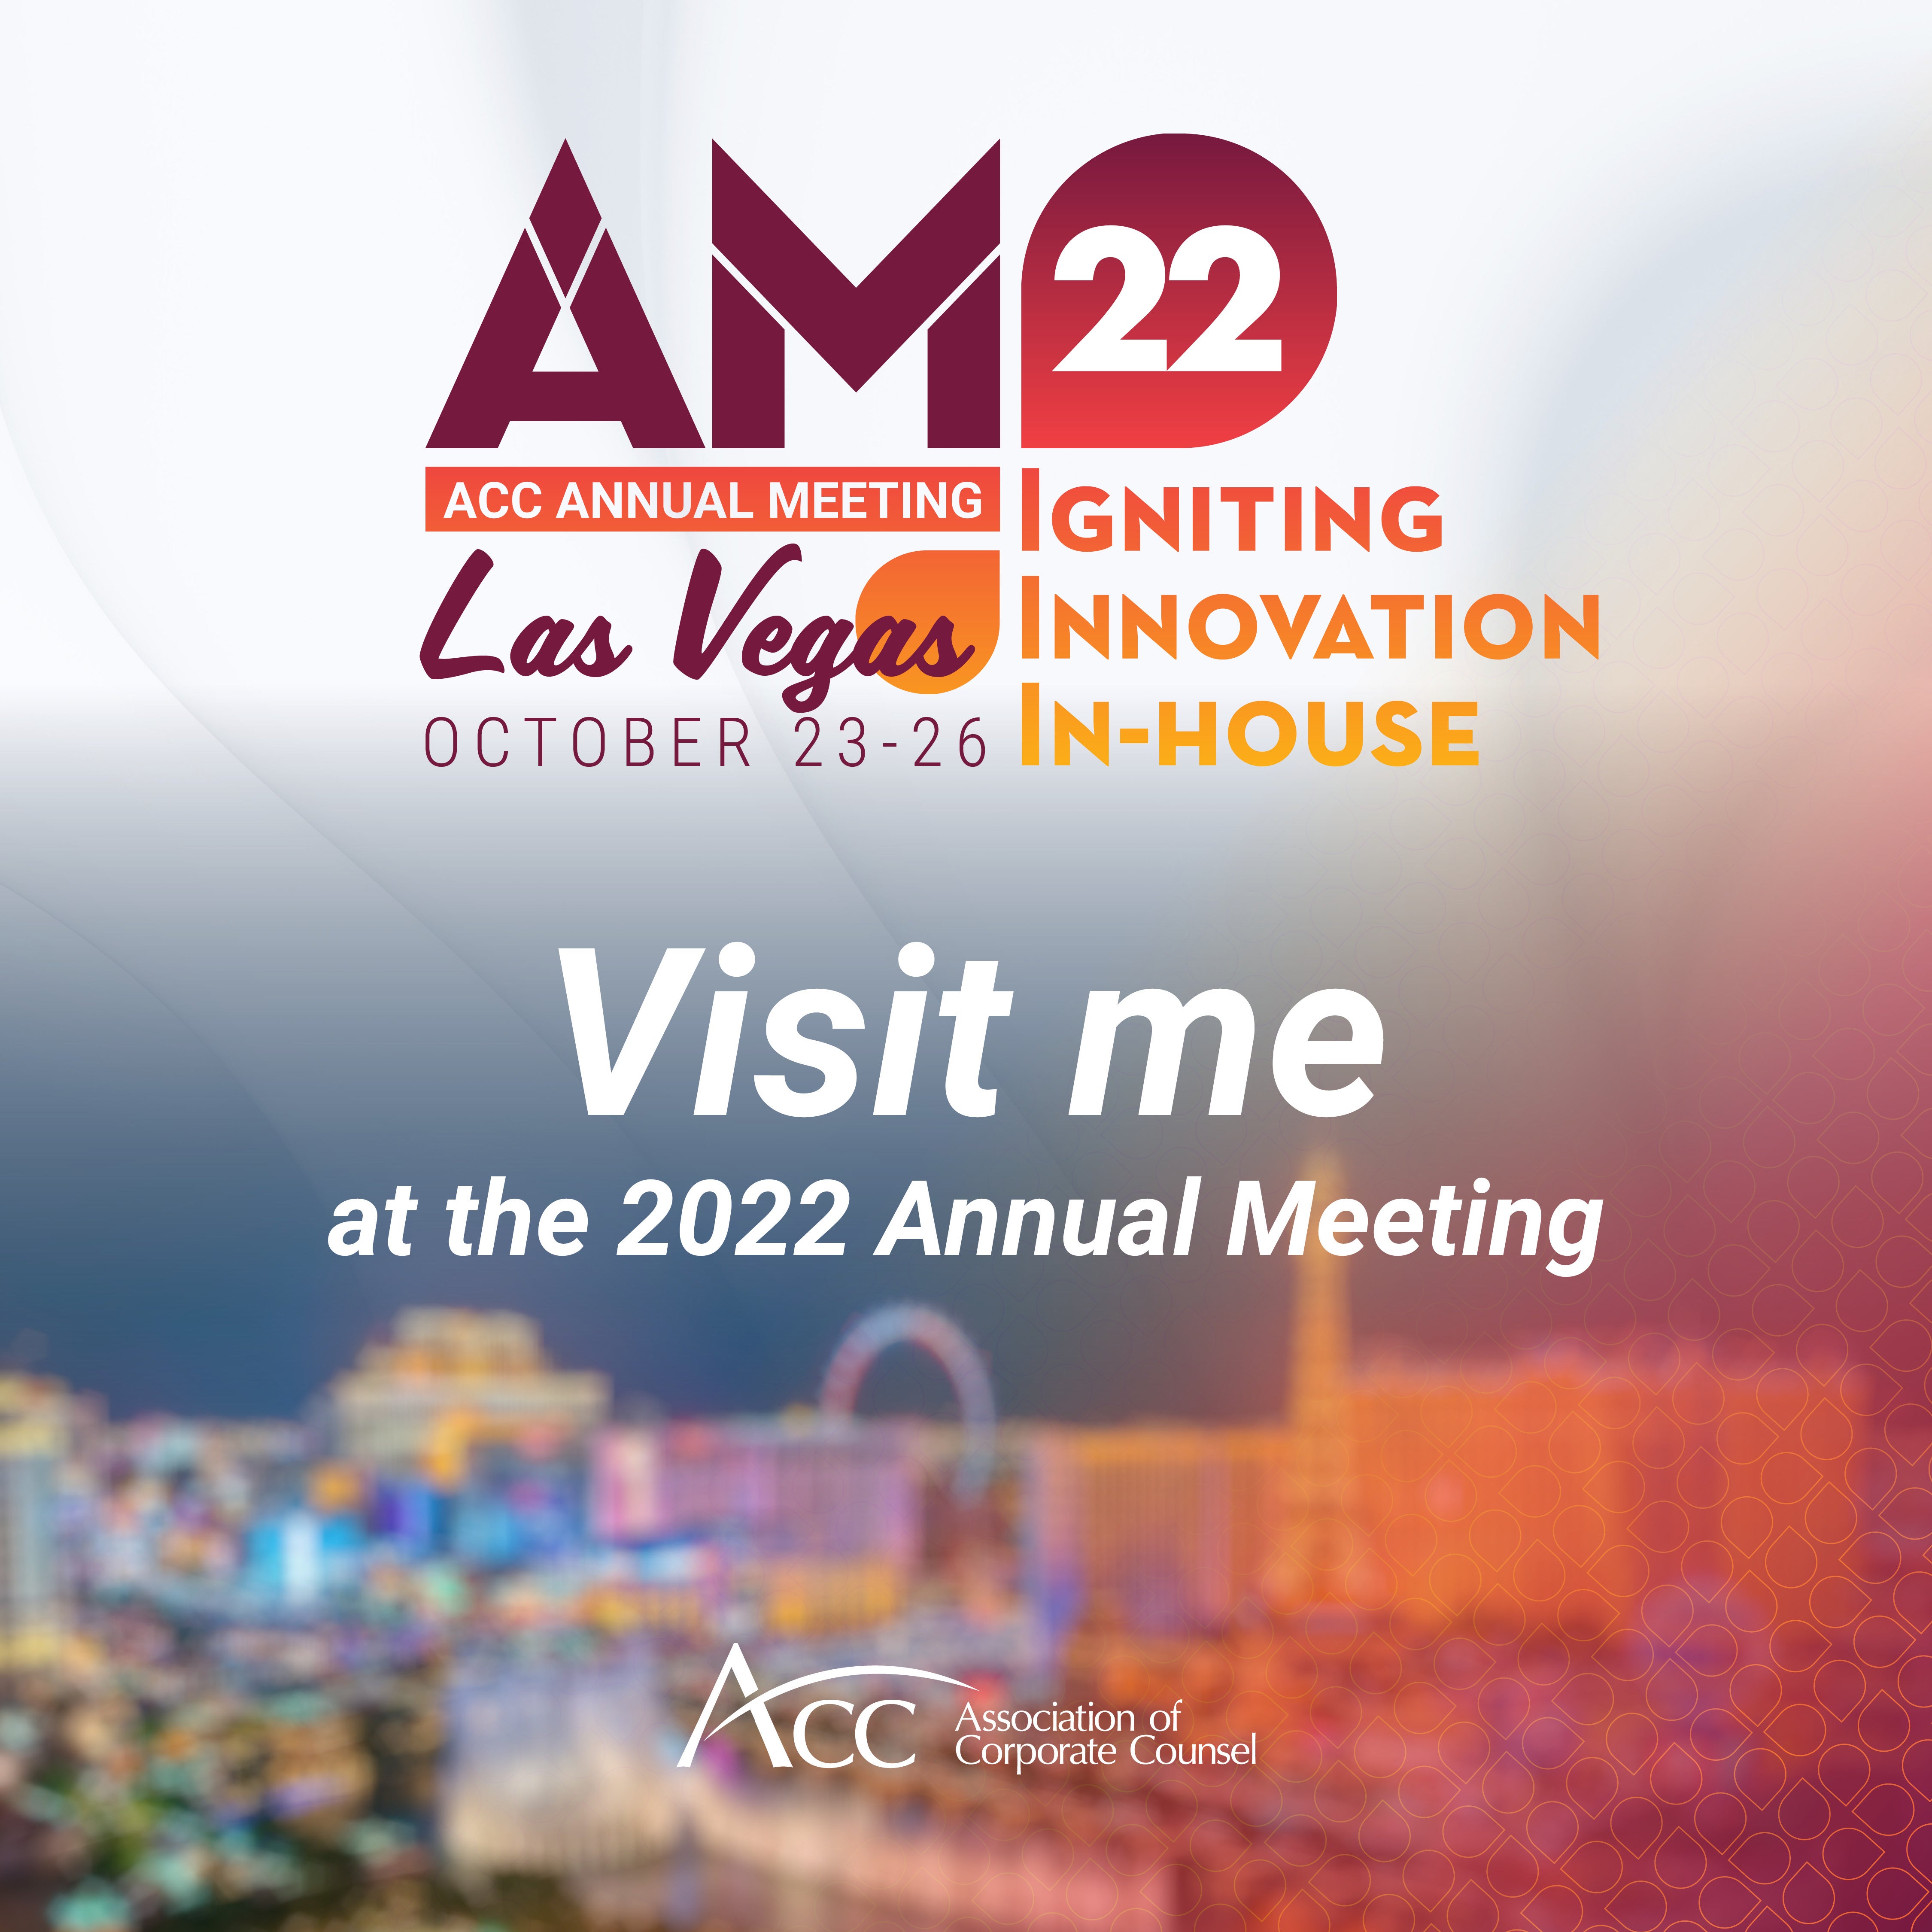 AM22 ACC Annual Meeting Las Vegas October 23-26 Igniting Innovation In-house Visit me at the 2022 Annual Meeting ACC Association of Corporate Counsel